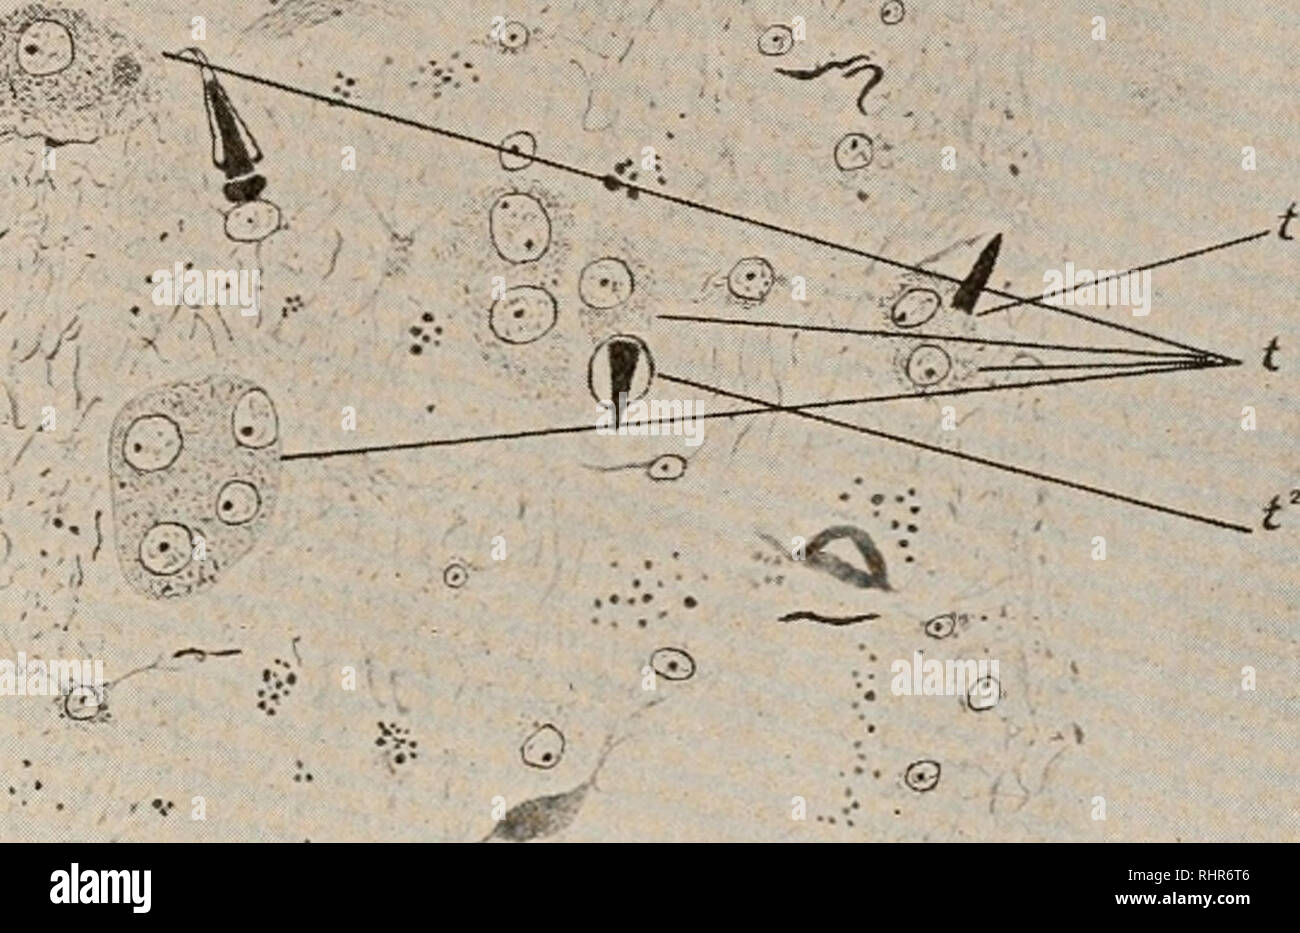 . The Biological bulletin. Biology; Zoology; Biology; Marine Biology. ASSOCIATION OF SOMATIC AND GERM CELLS IN CESTODES. 313 In the accompanying figure, however, I have shown what I consider good evidence in support of the former v'ew. This shows part of a proglottid of Dipylidium caninum con- taining numerous early testes. One of these contains but two cells, of which one is a developing flame cell (t'} showing only the cone of cilia, while the other is a testis cell. Another shows. A part of the parenchyma of Dipylidium caninum, showing developing testes (t), two of which contain flame cells Stock Photo